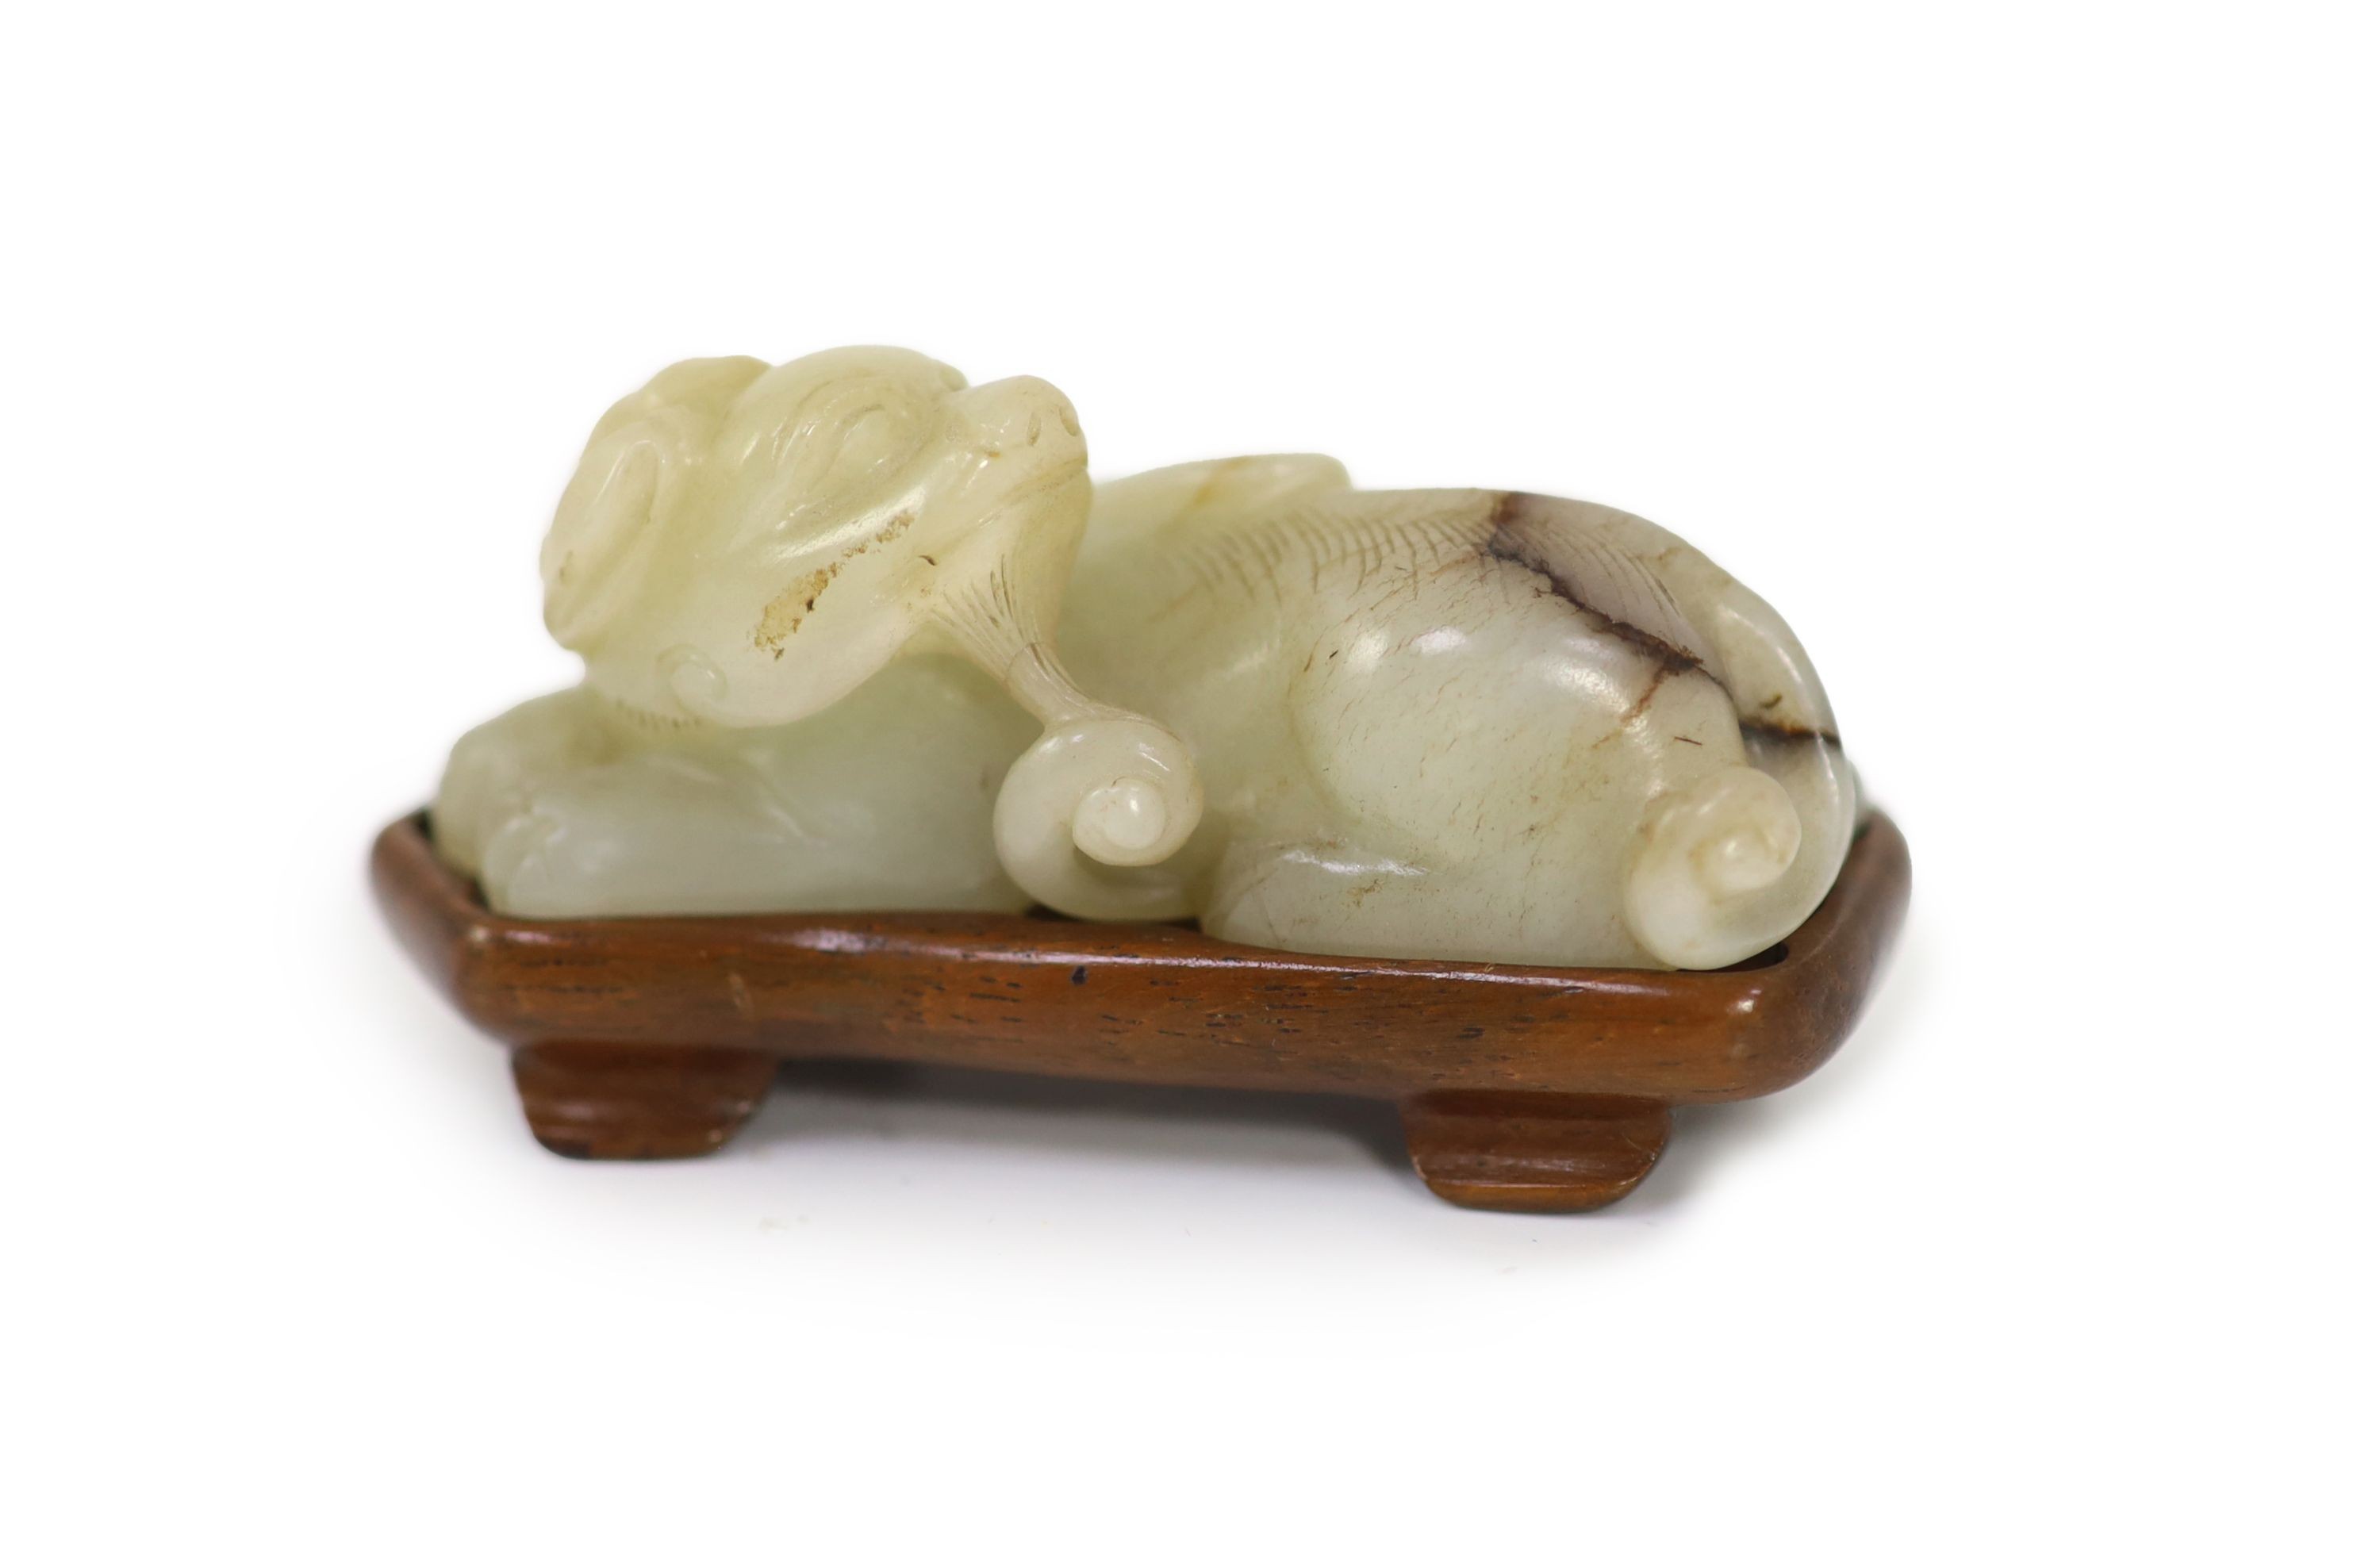 A Chinese pale celadon and brown jade figure of a lion-dog, 18th/19th century, 6.7cm long, wood stand